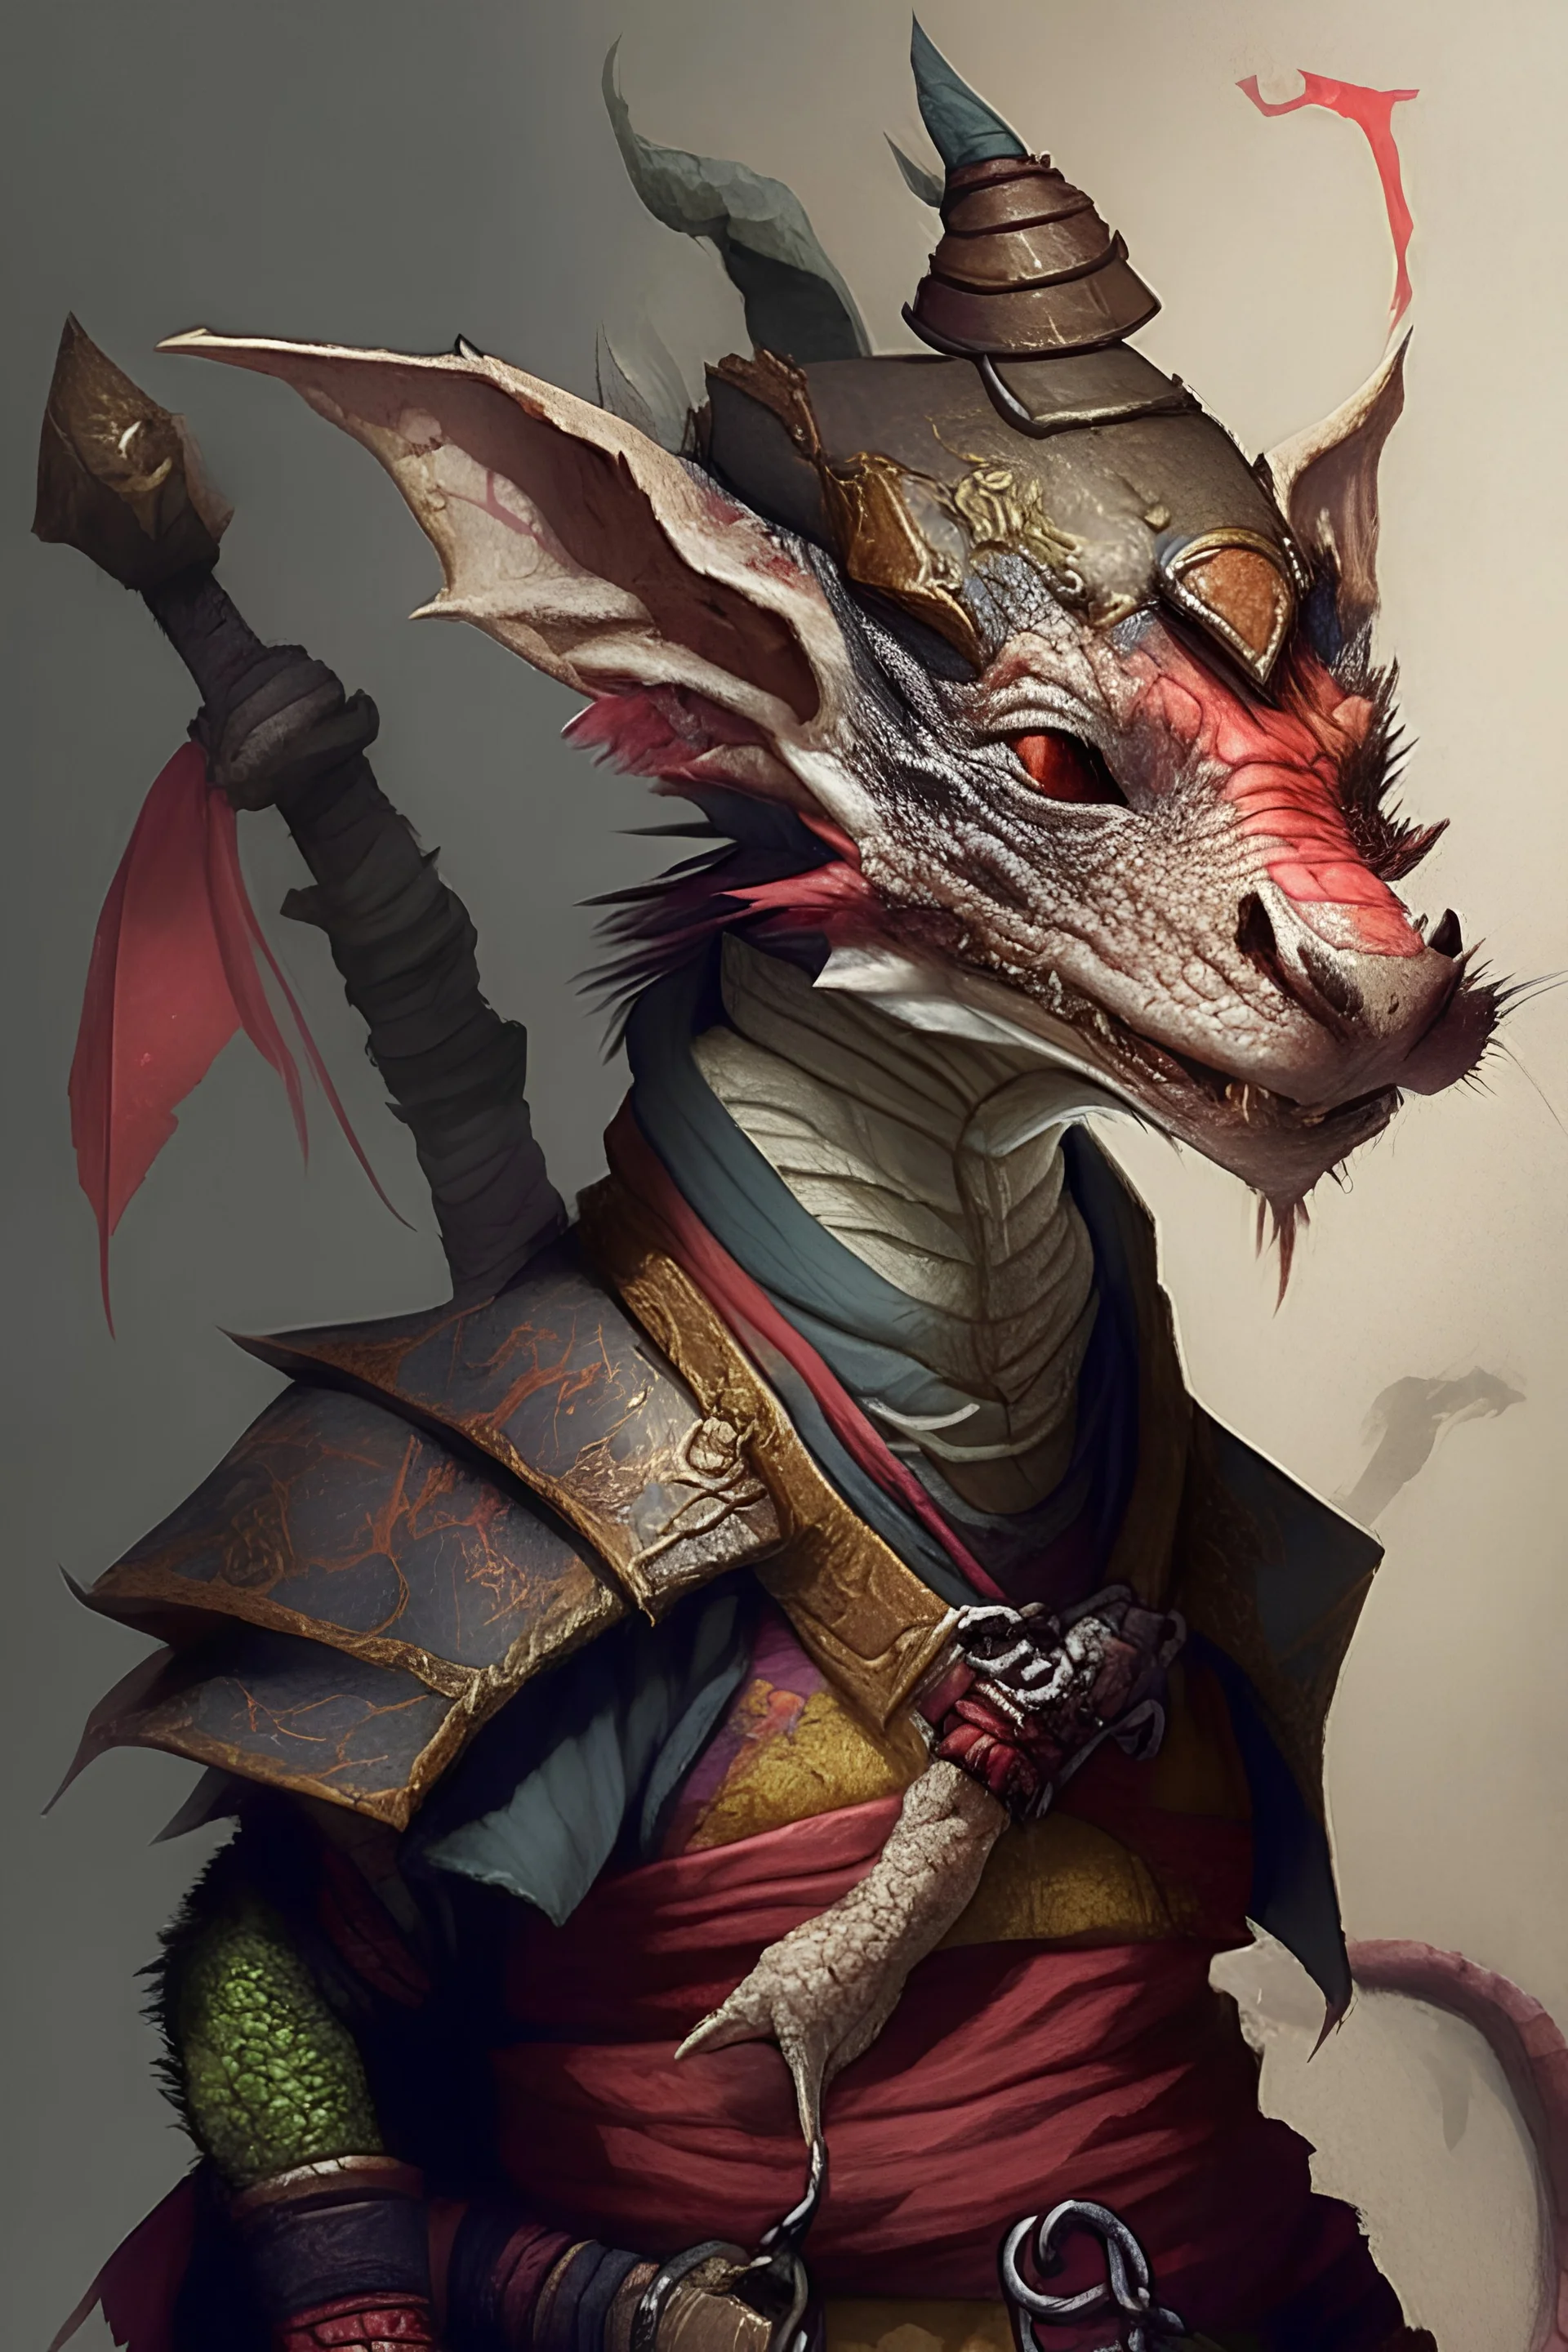 D&D kobold mixed with a chinese dragon